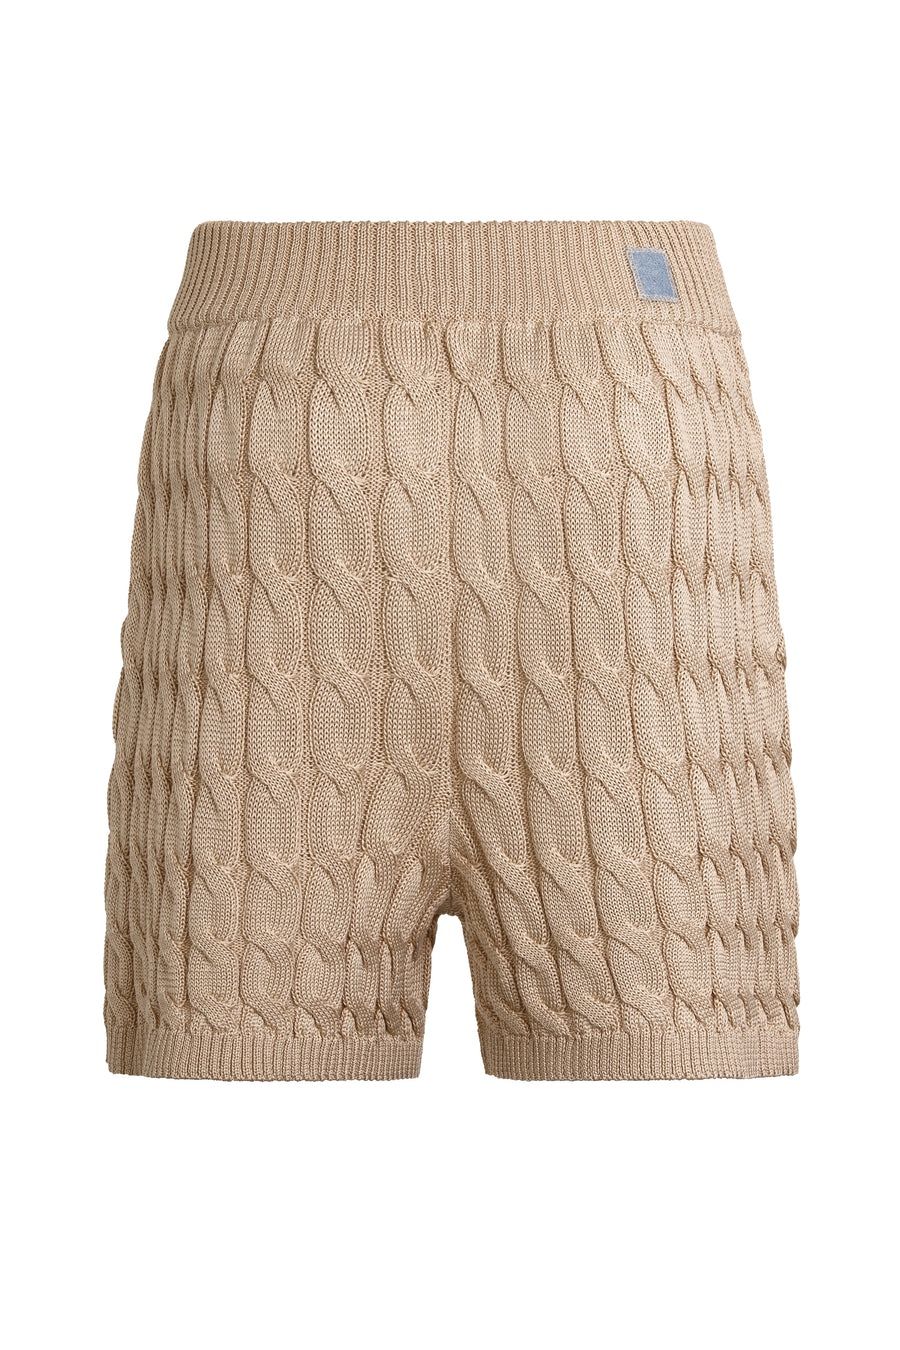 The Mercerized Country Club Shorts